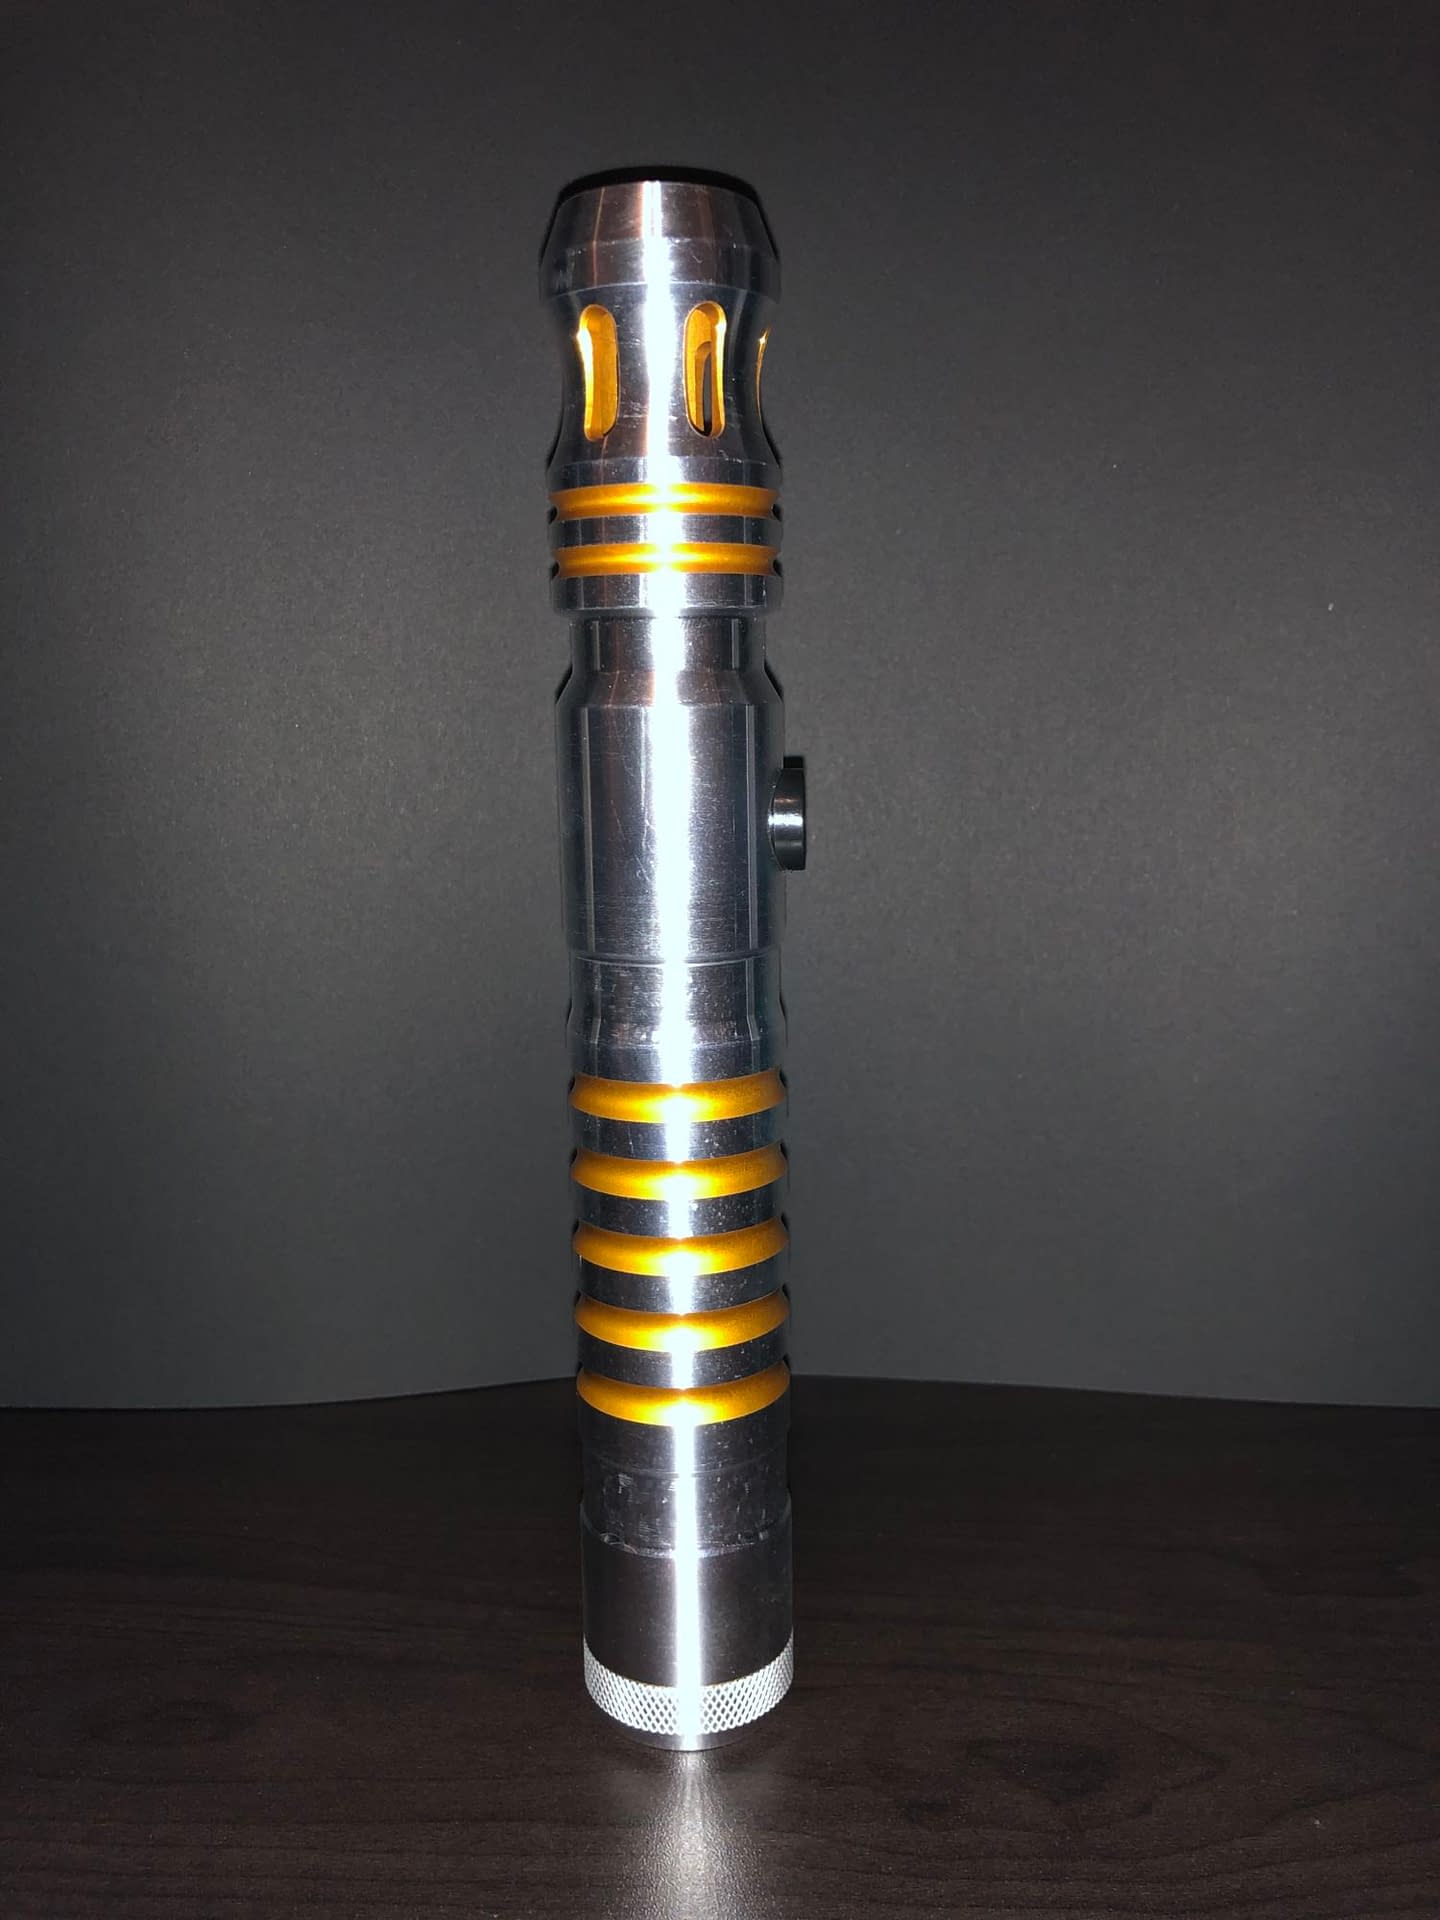 Bring Your Lightsaber Fantasy to Life with Ultrasabers [Review]